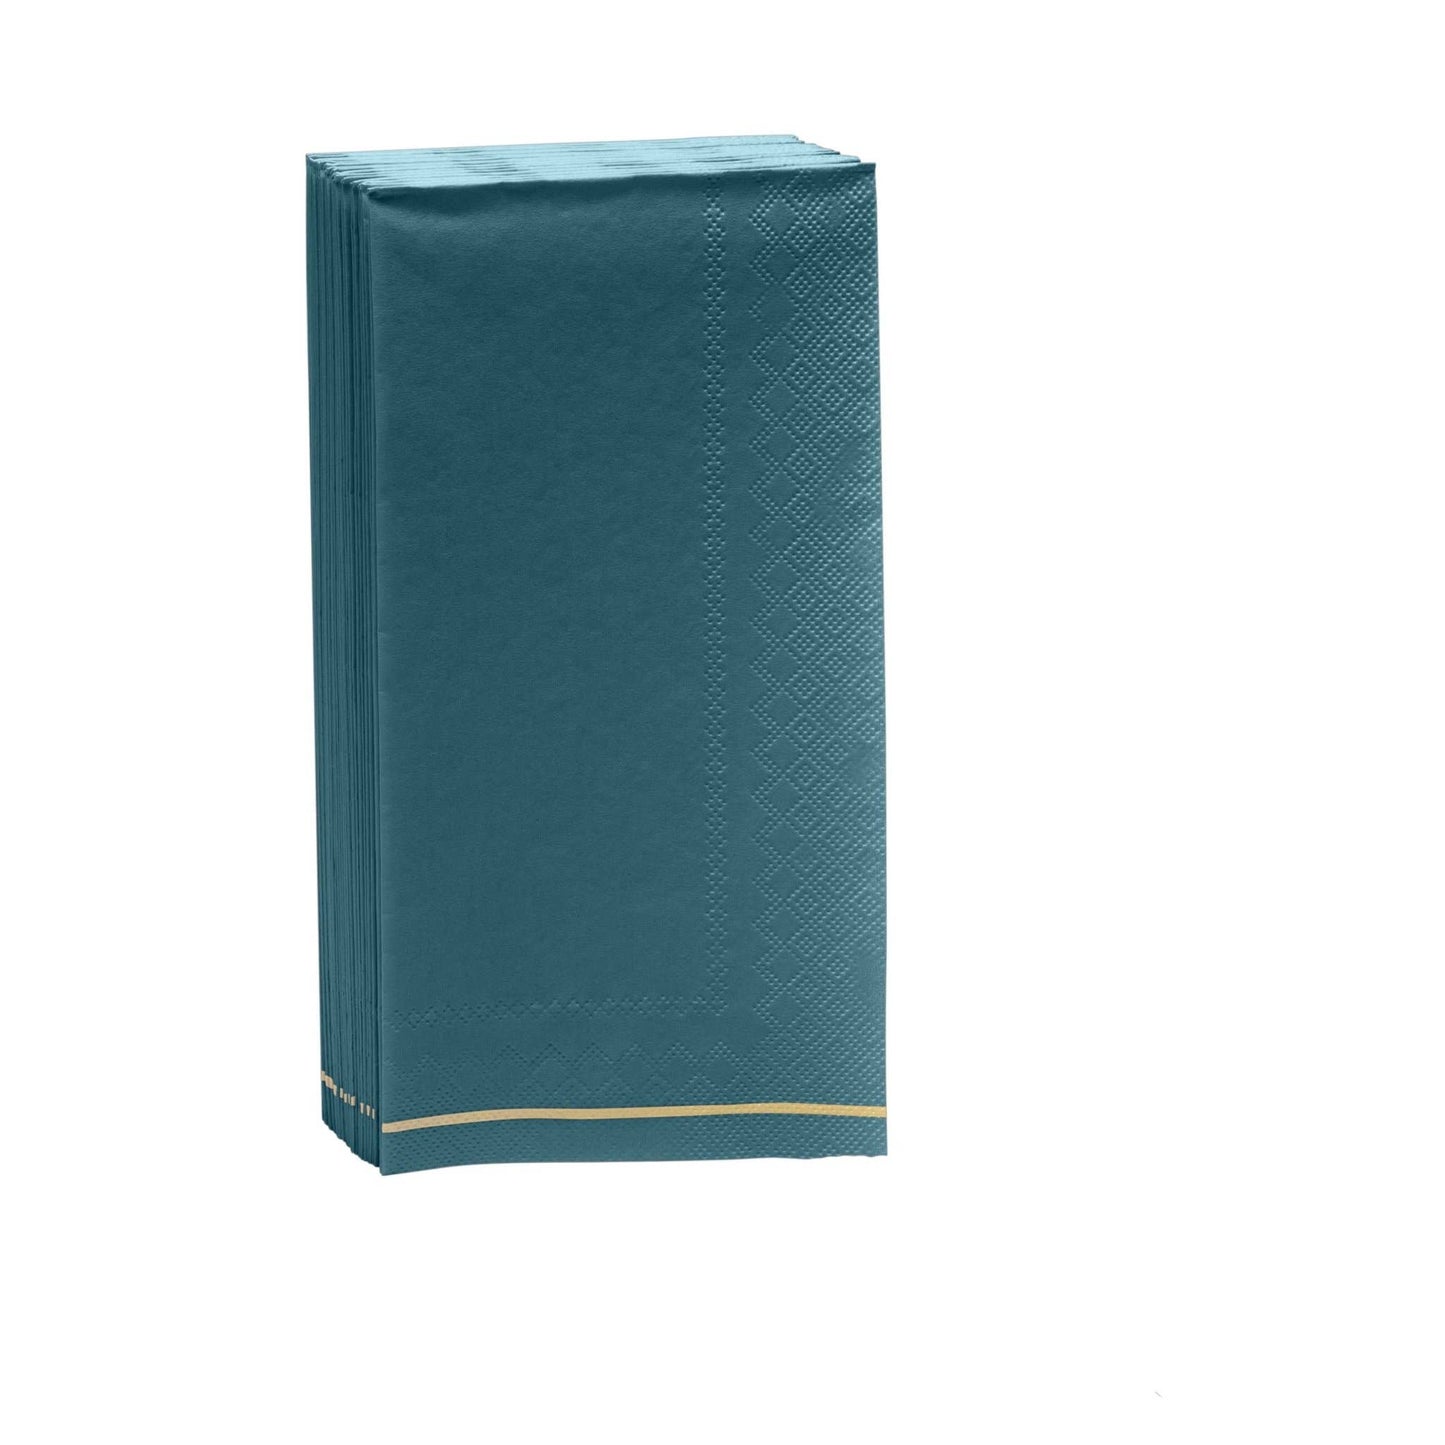 Napkins - Teal with Gold Stripe - 16 per Pack - SimplySoiree